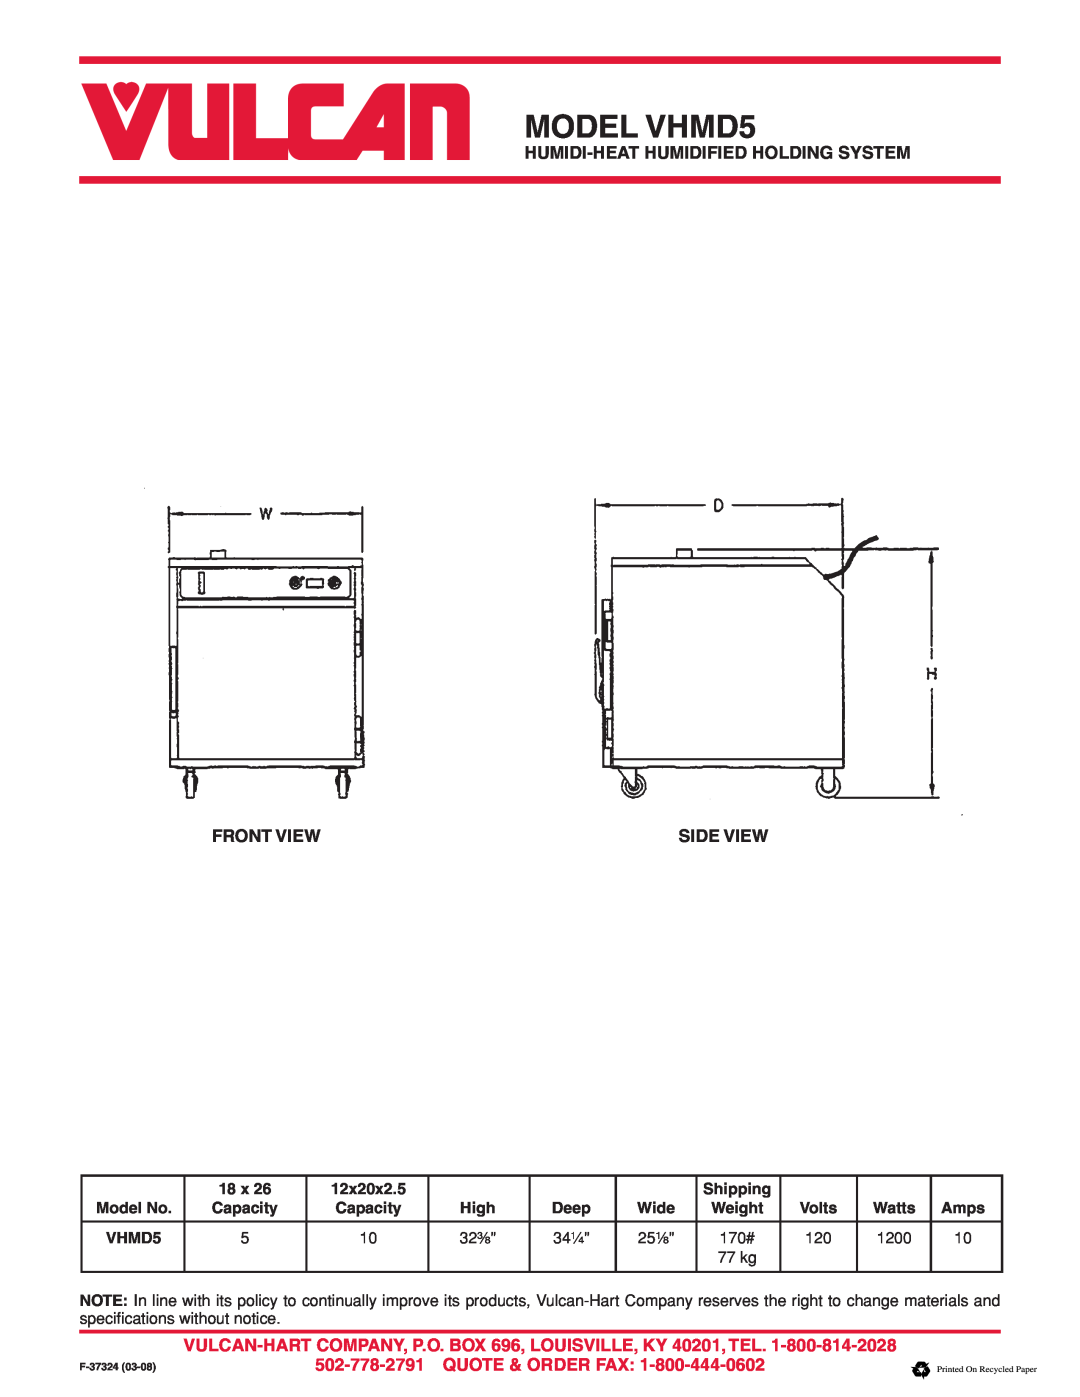 Vulcan-Hart specifications Front View, Side View, MODEL VHMD5, Humidi-Heathumidified Holding System, Quote & Order Fax 